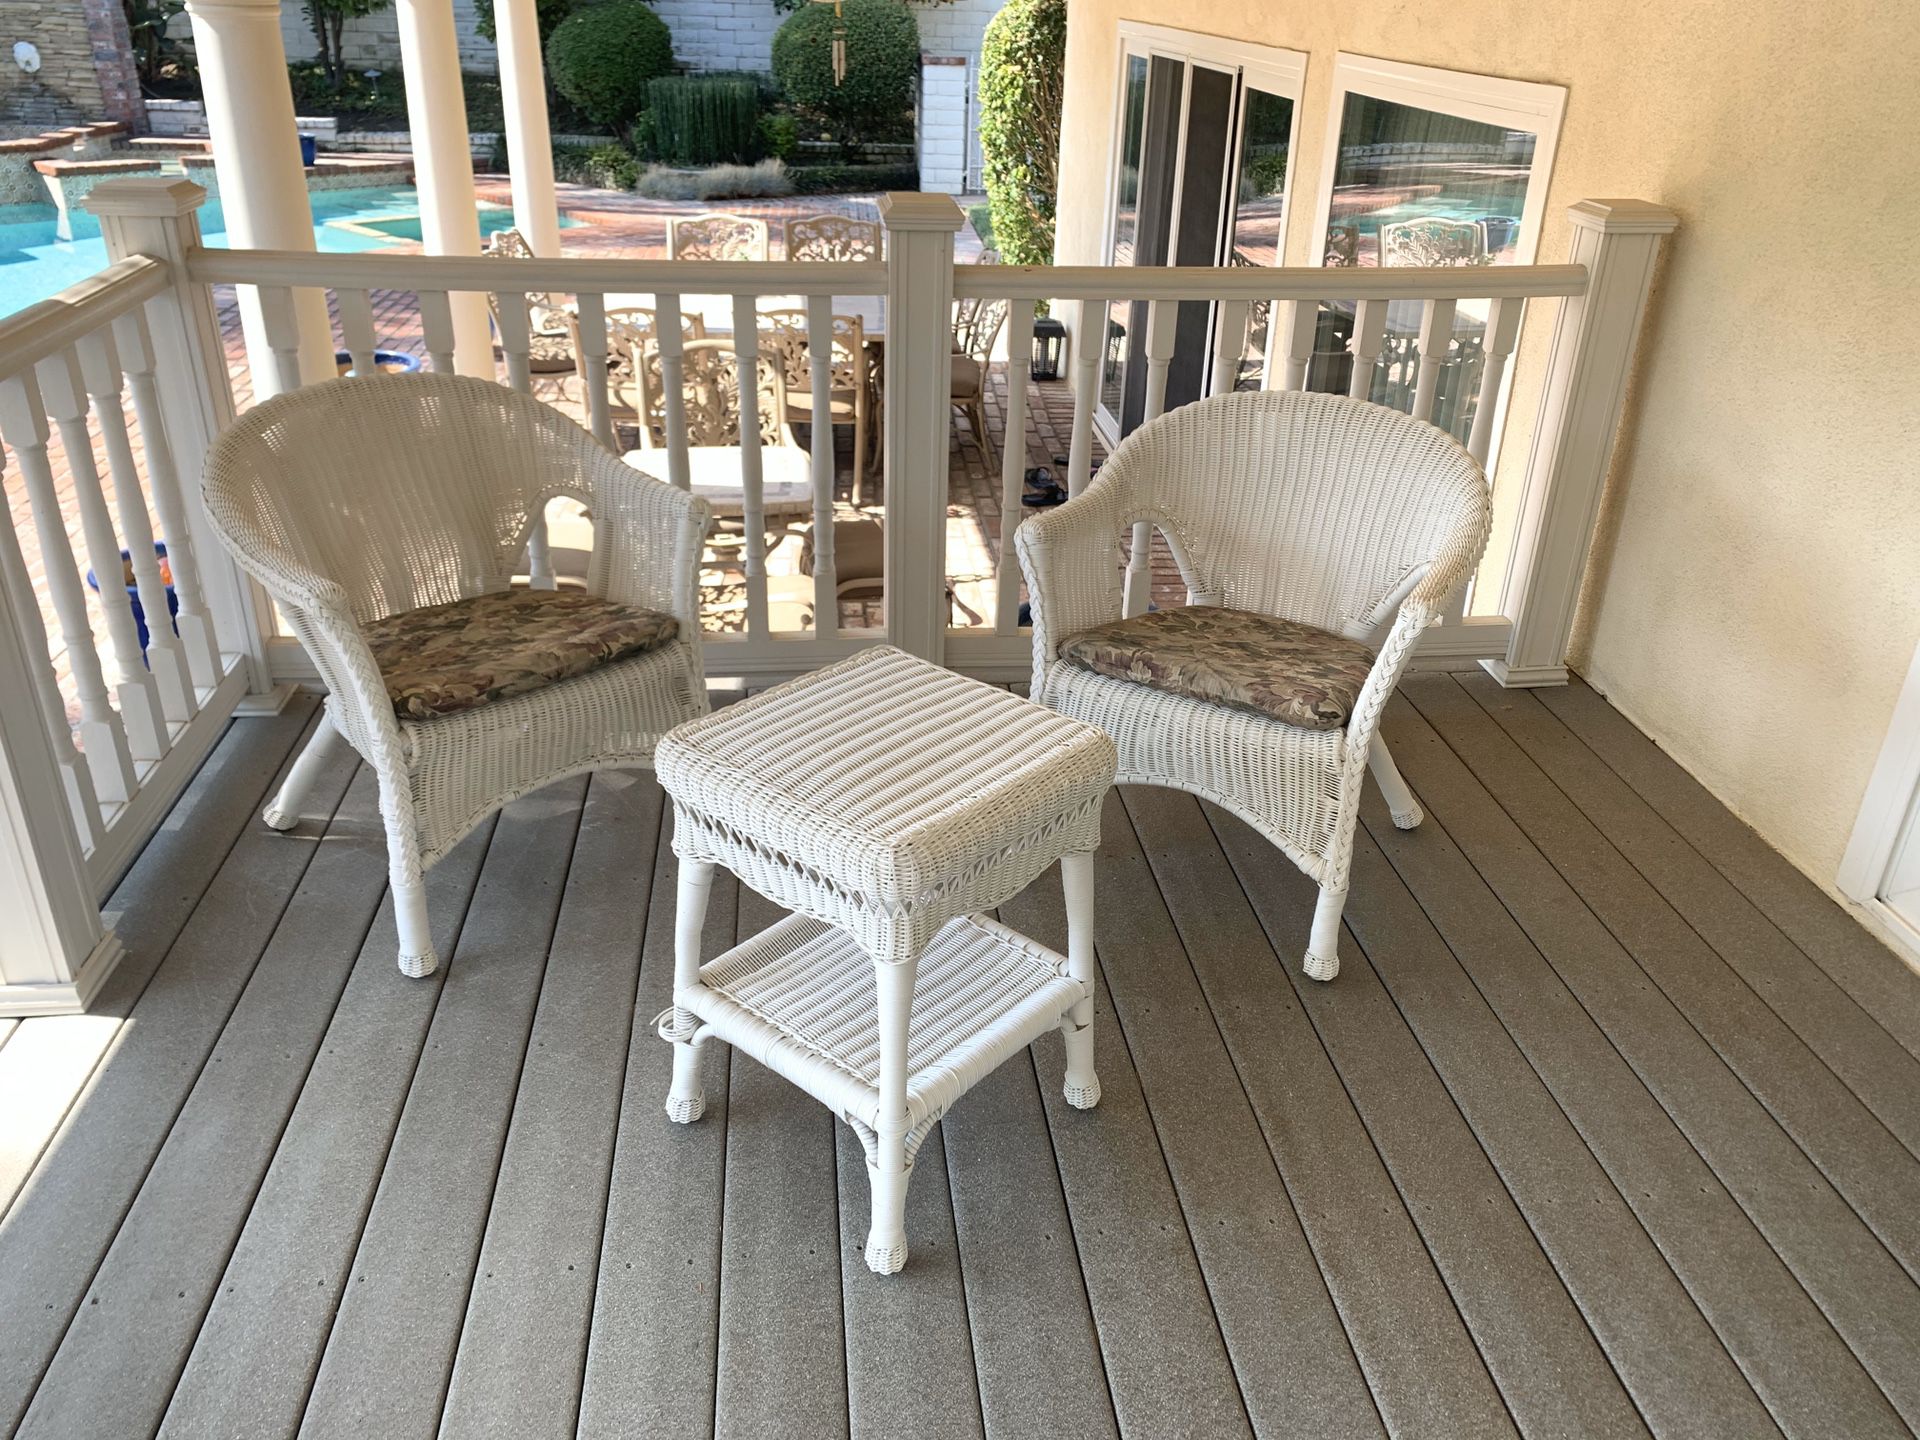 Patio set, white wicker; 3 stools included